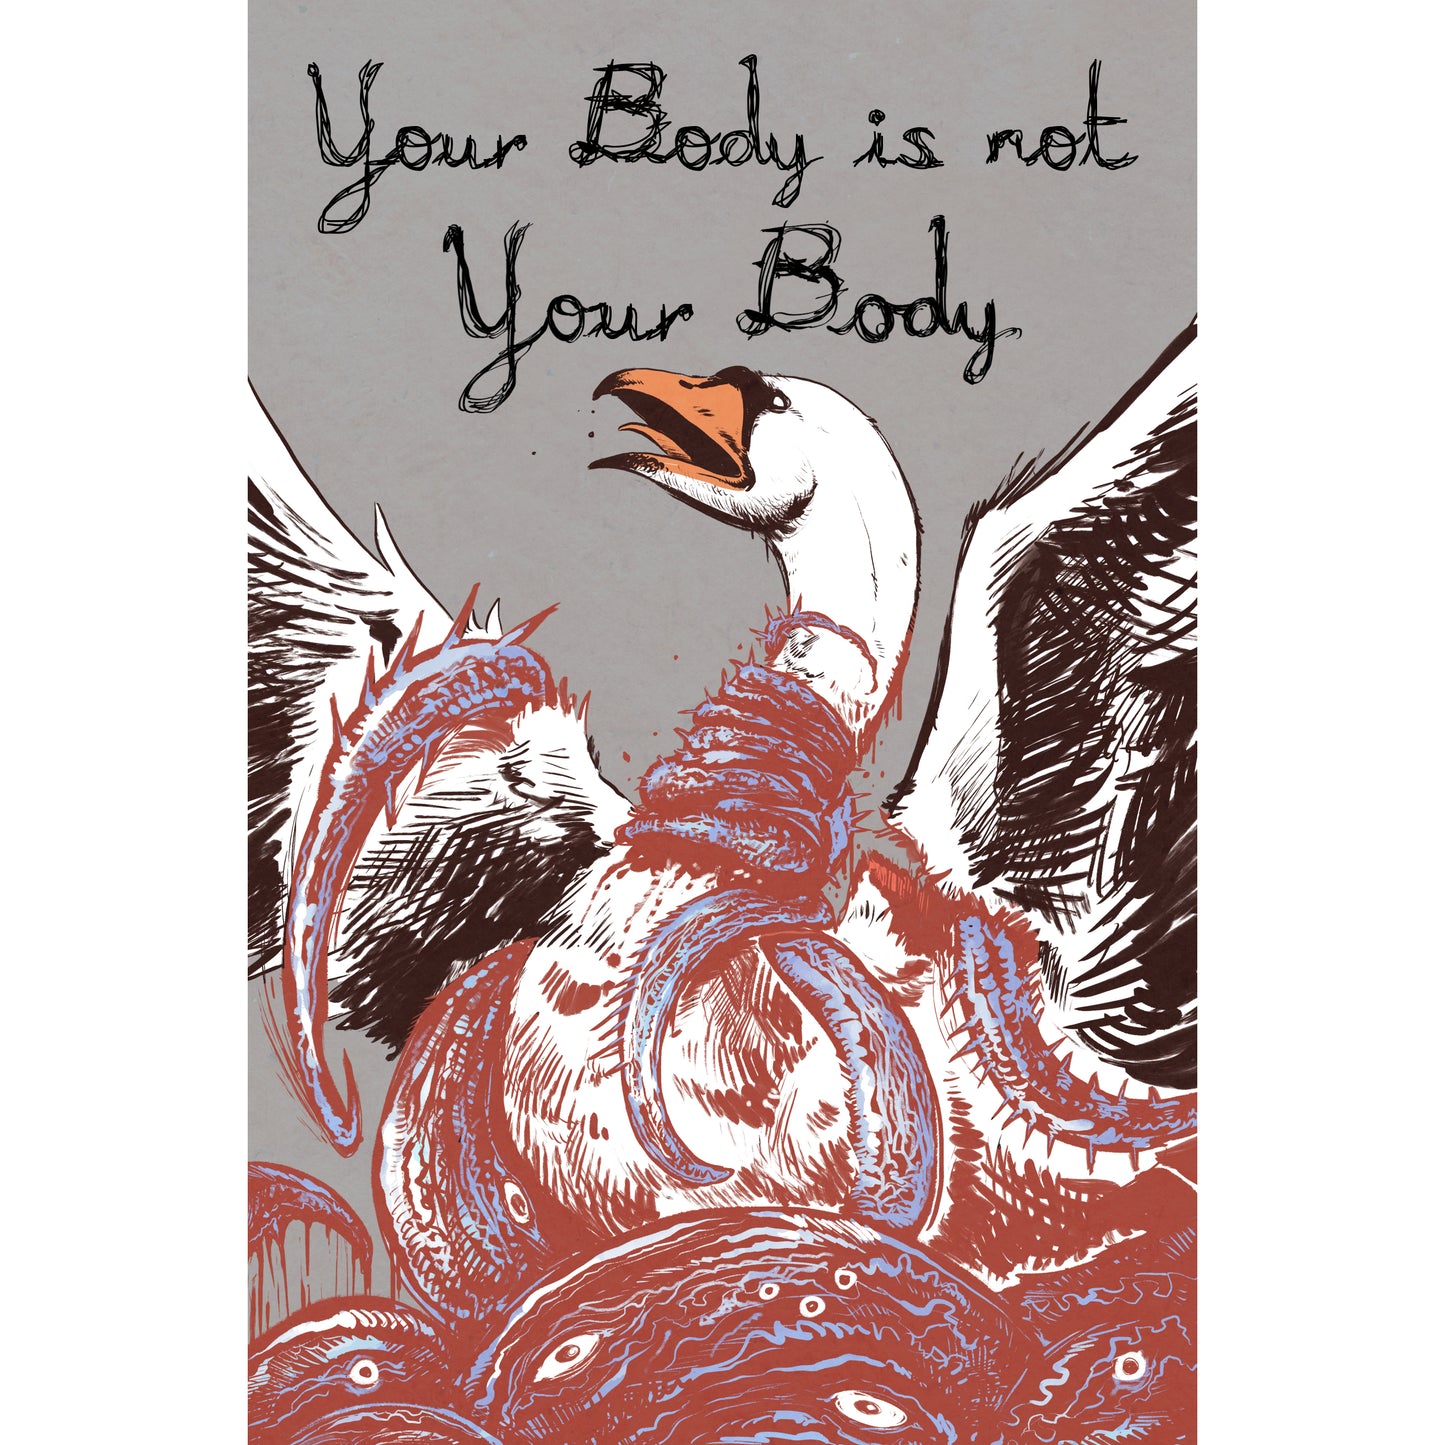 YOUR BODY IS NOT YOUR BODY - anthology (softcover 240 pages; includes eBook)